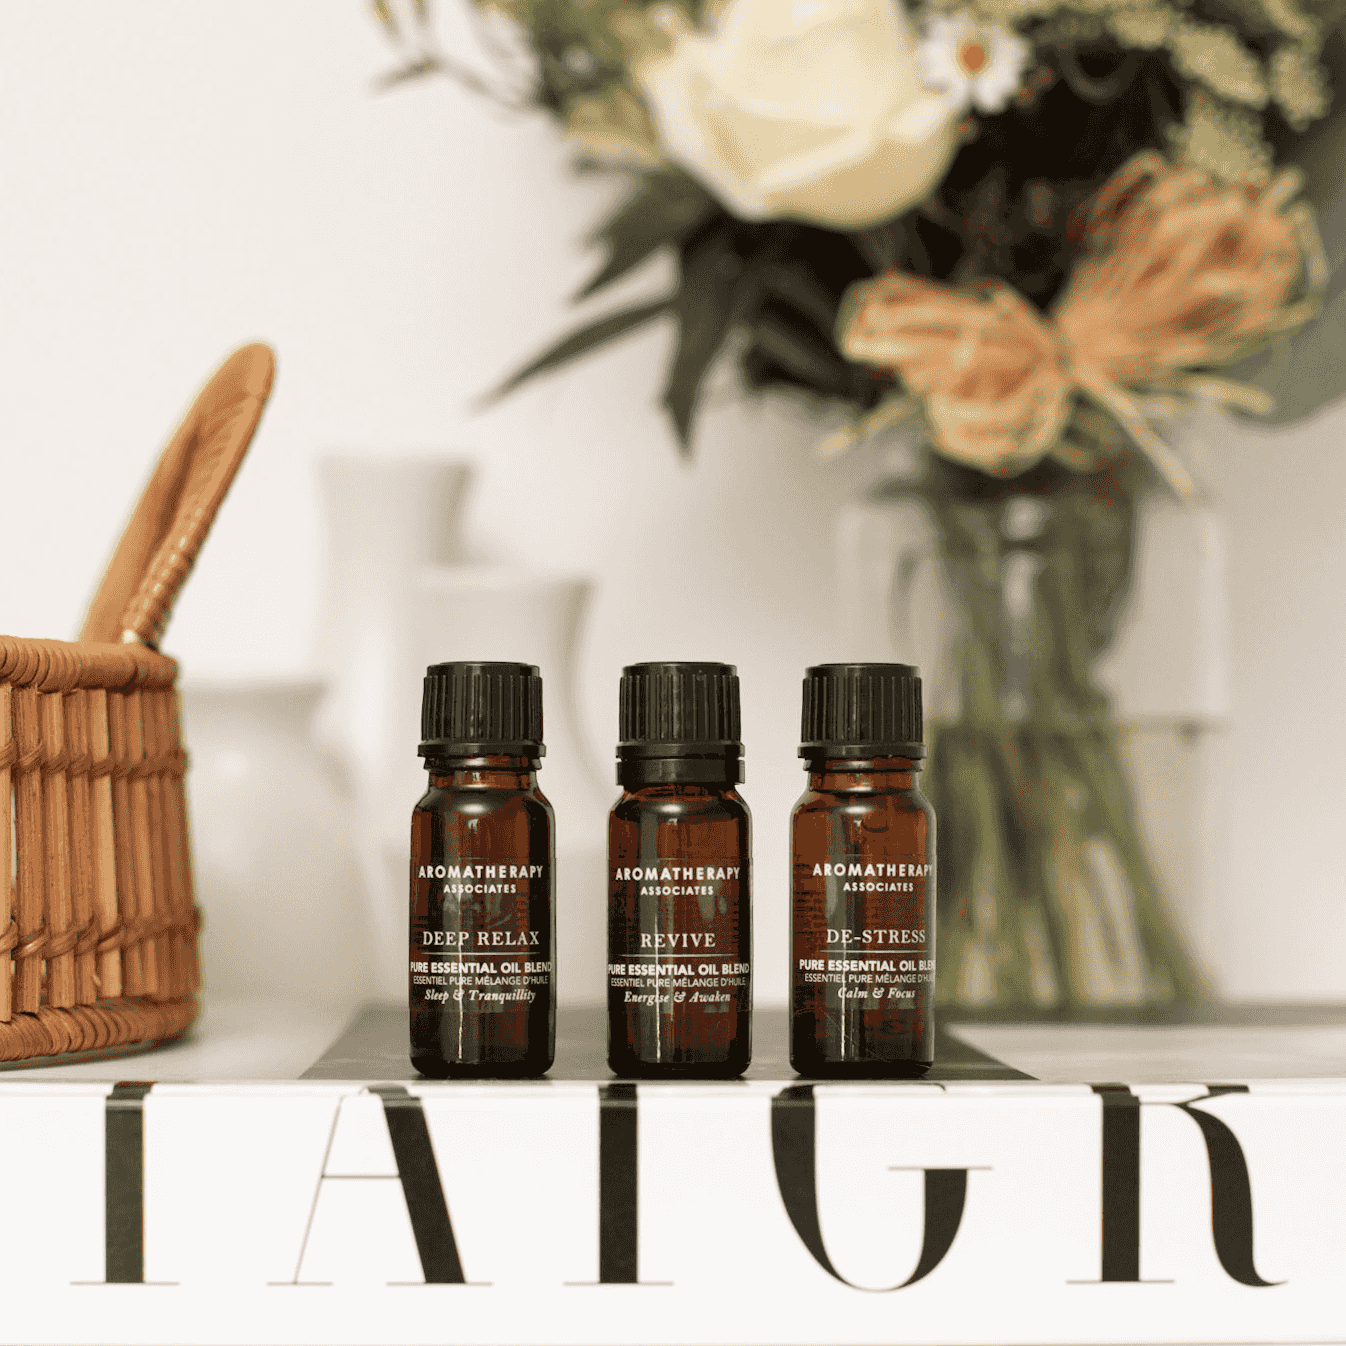 Essential Oils Set - 4 Oils & 2 Blends, Top 6 Essential Oils for Diffusers  for Home, Stress Relief, Serenity Sleep Oil Blend Aromatherapy, Peppermint